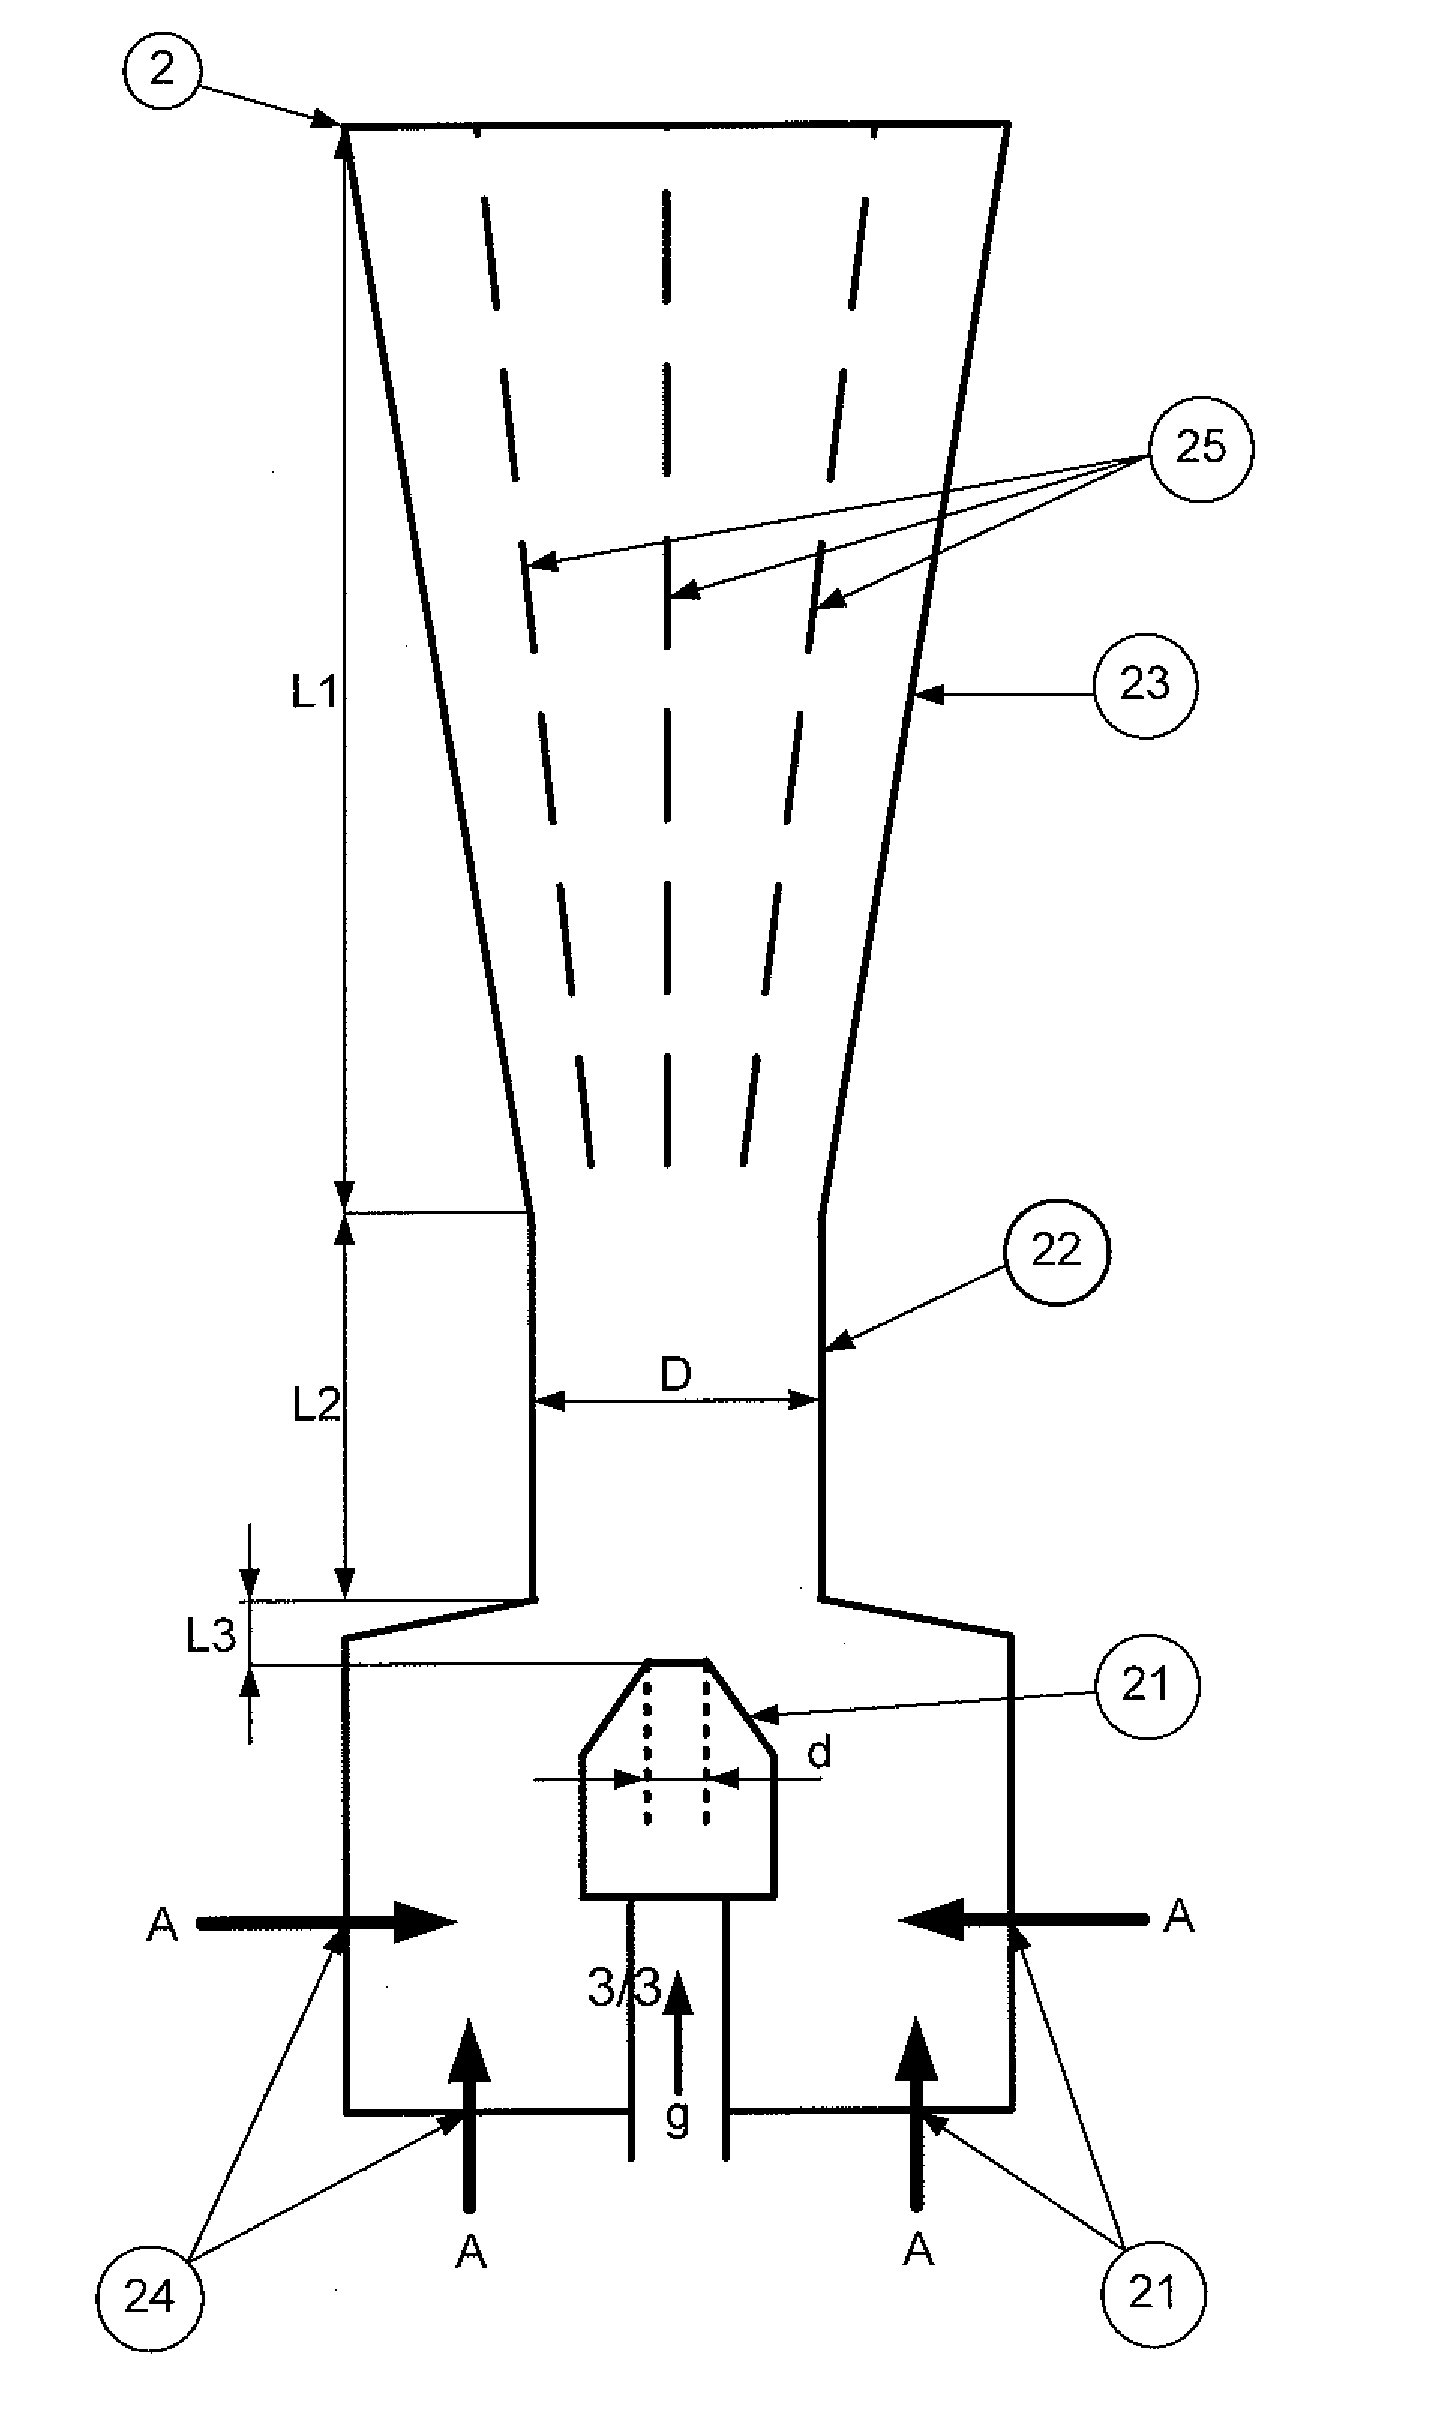 Method for extinguishing a smouldering fire in a silo